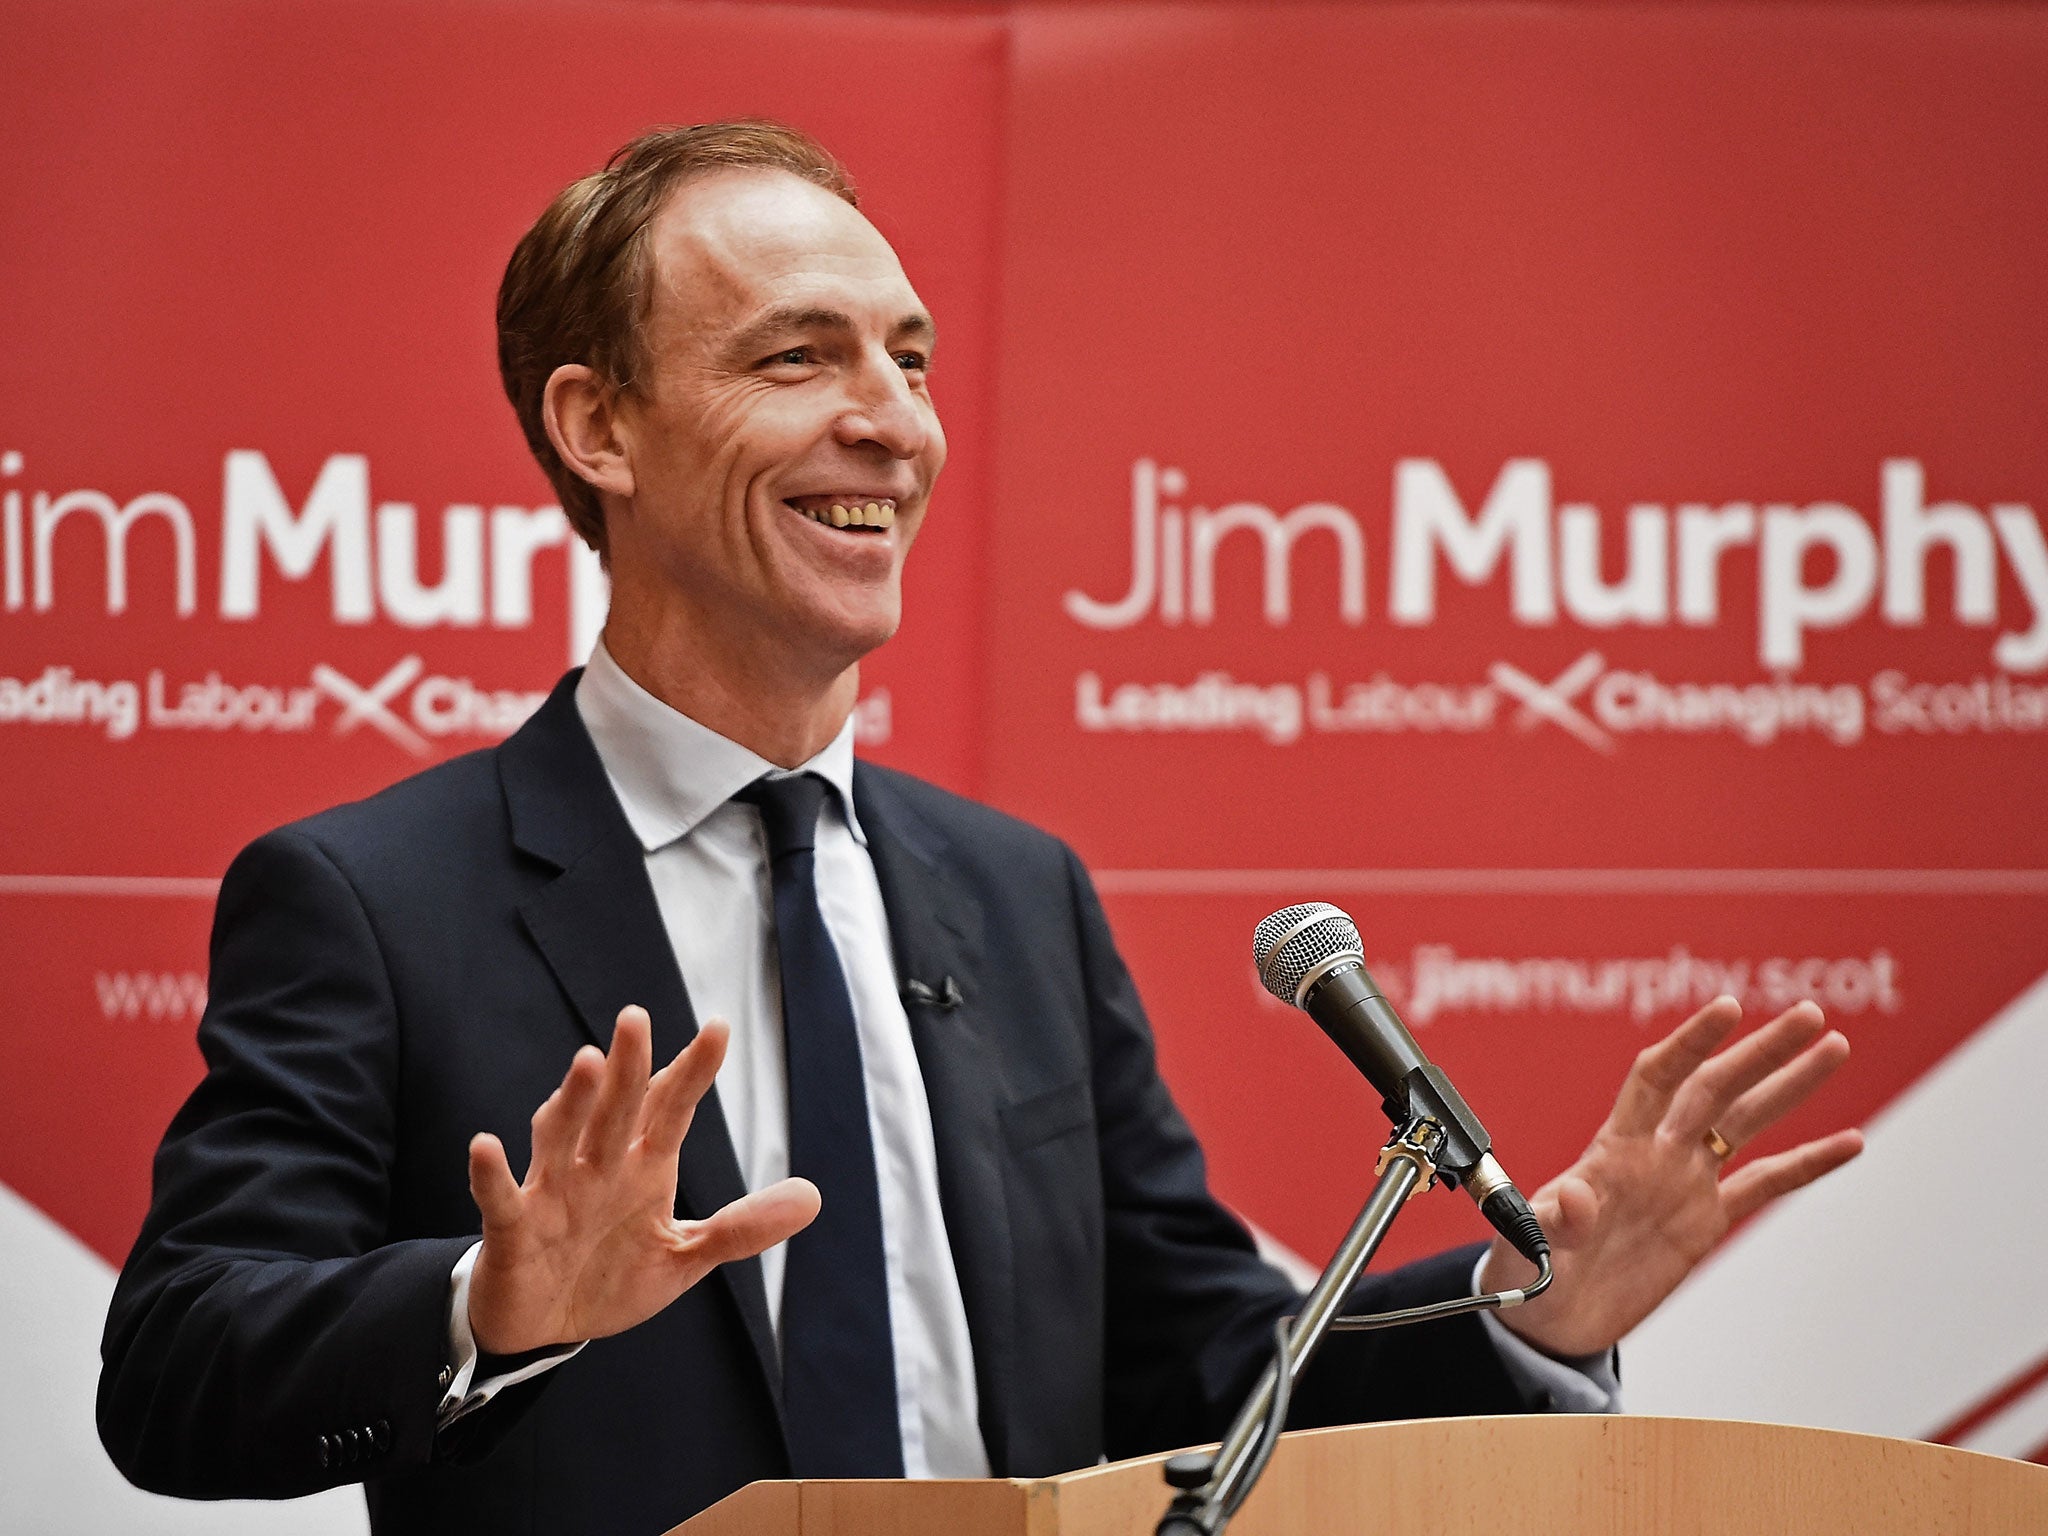 Despite assurances from the nationalists that they would not support a Tory government and were prepared to join Labour in blocking the Conservatives’ ability to run a minority government, Mr Murphy told supporters that “a vote for any other party is a vo